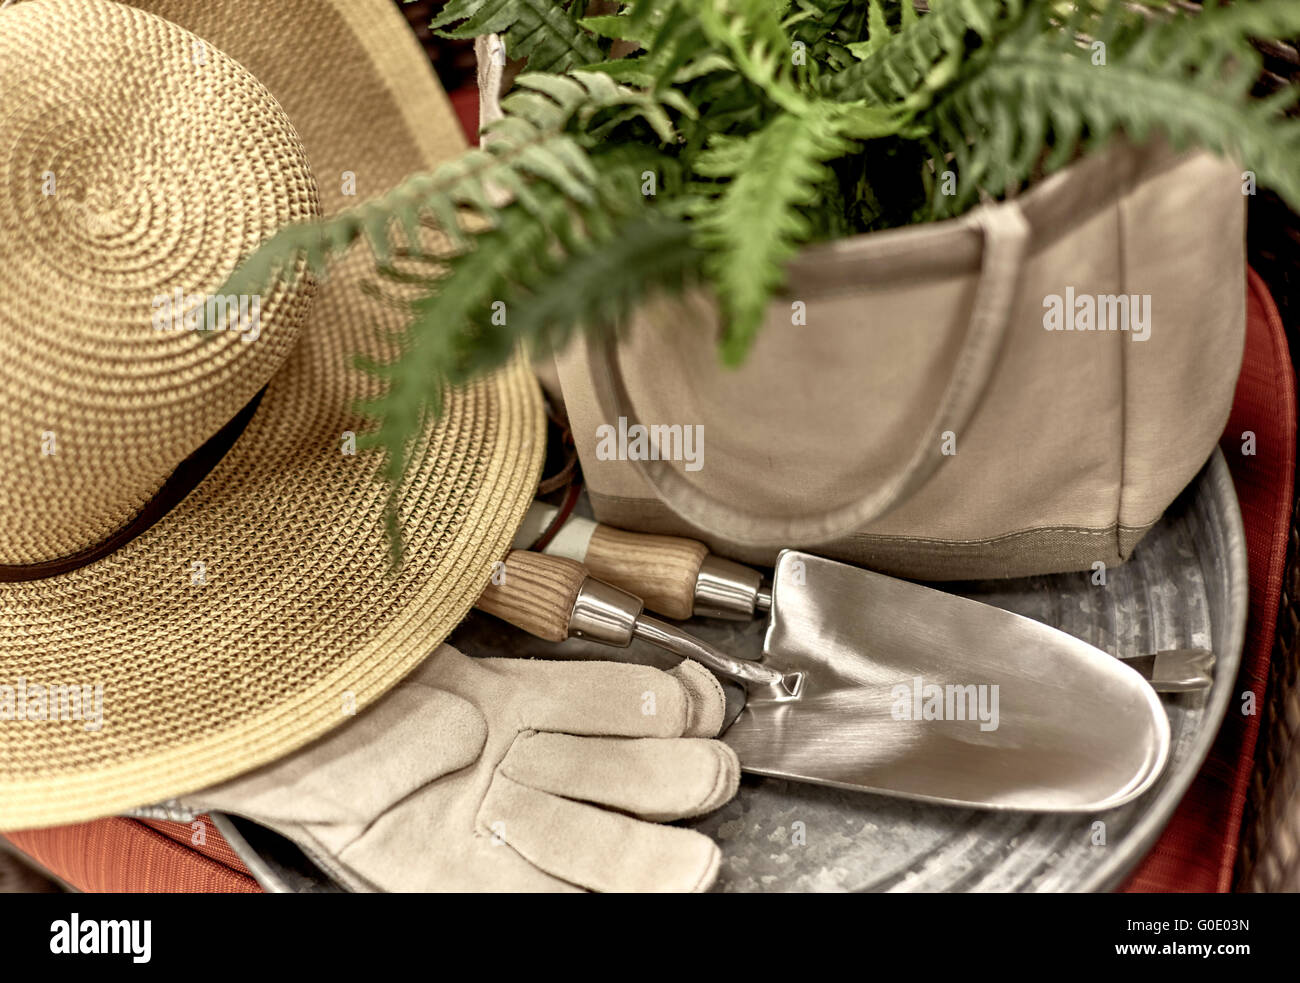 Garden work gloves, sun hat, and trowel on a tray with shallow depth of field Stock Photo